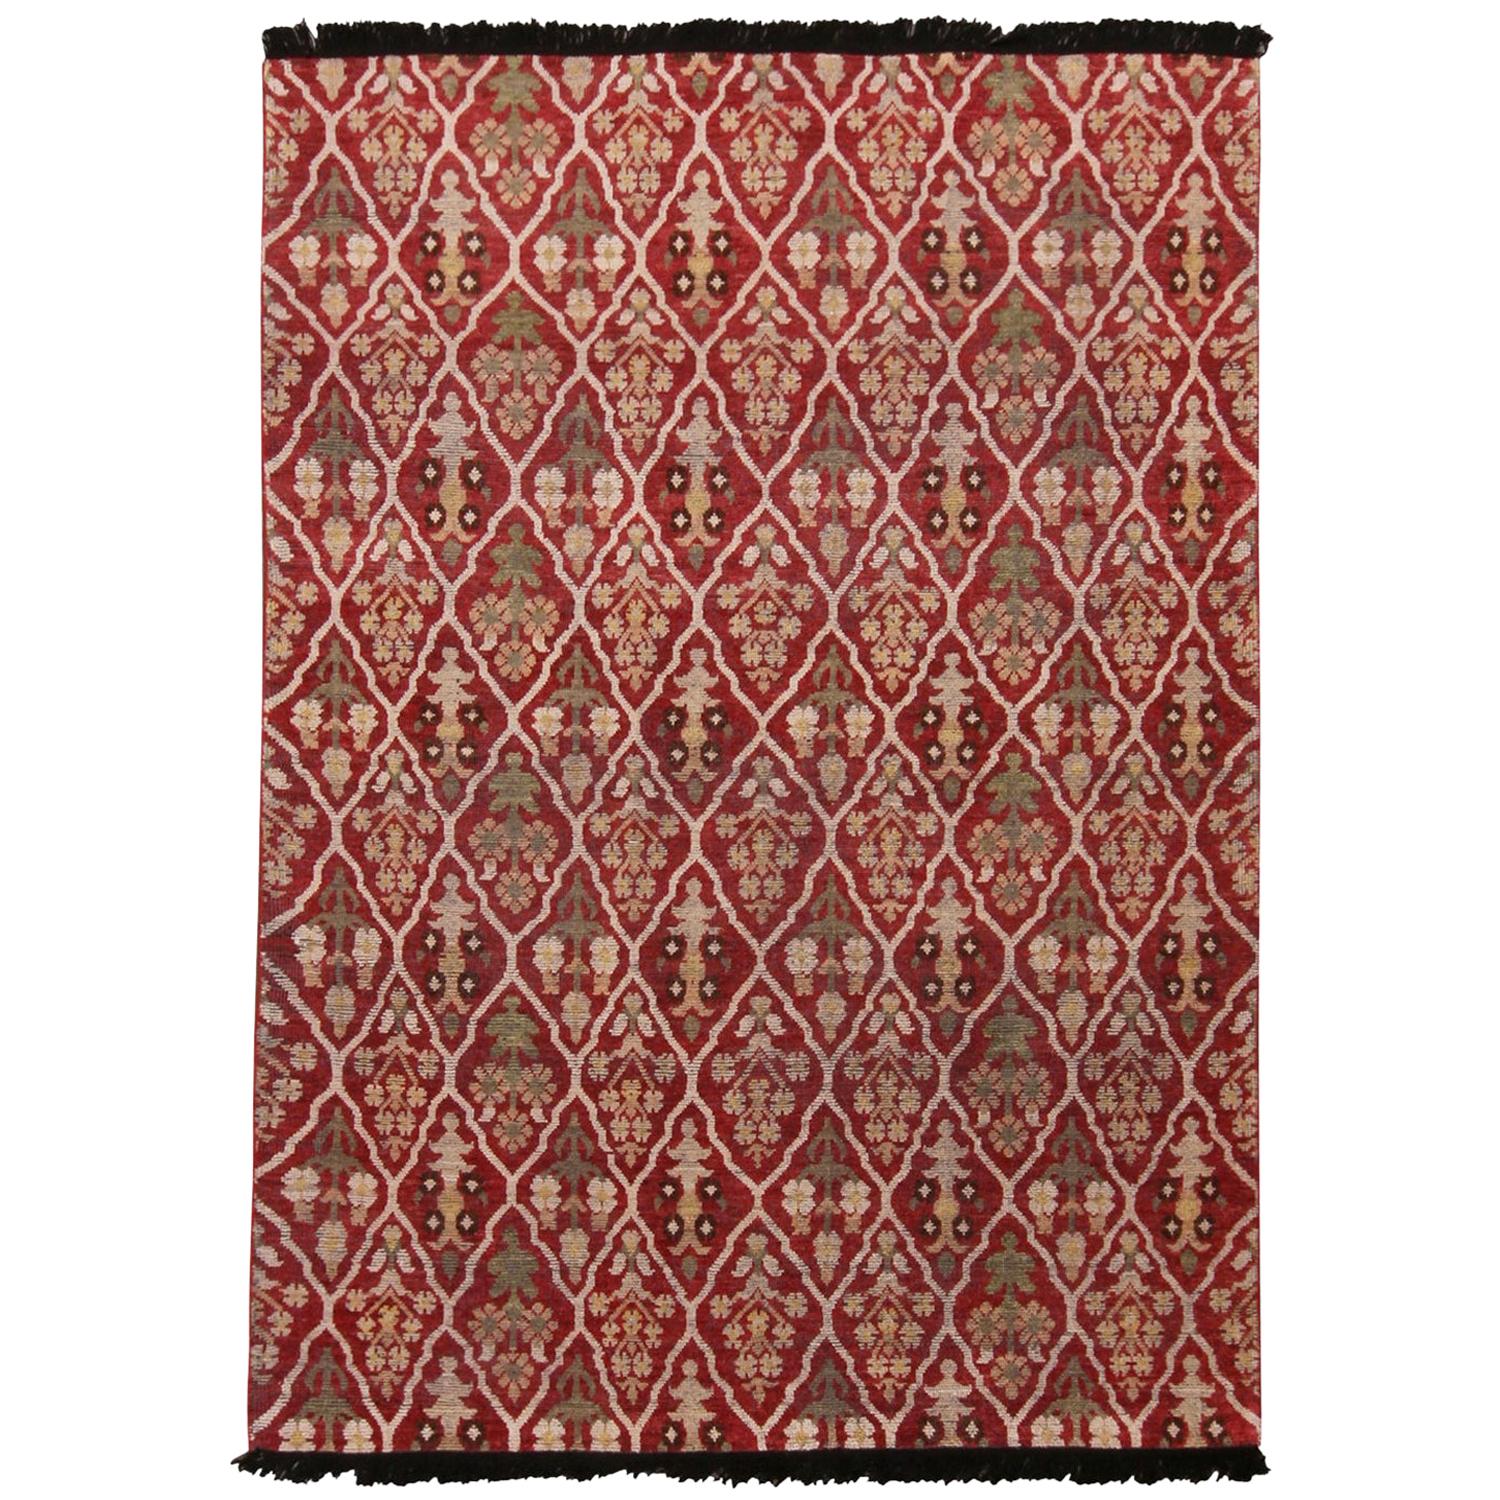 Rug & Kilim's Burano Beige and Burgundy Red Wool Rug with Green Accents For Sale